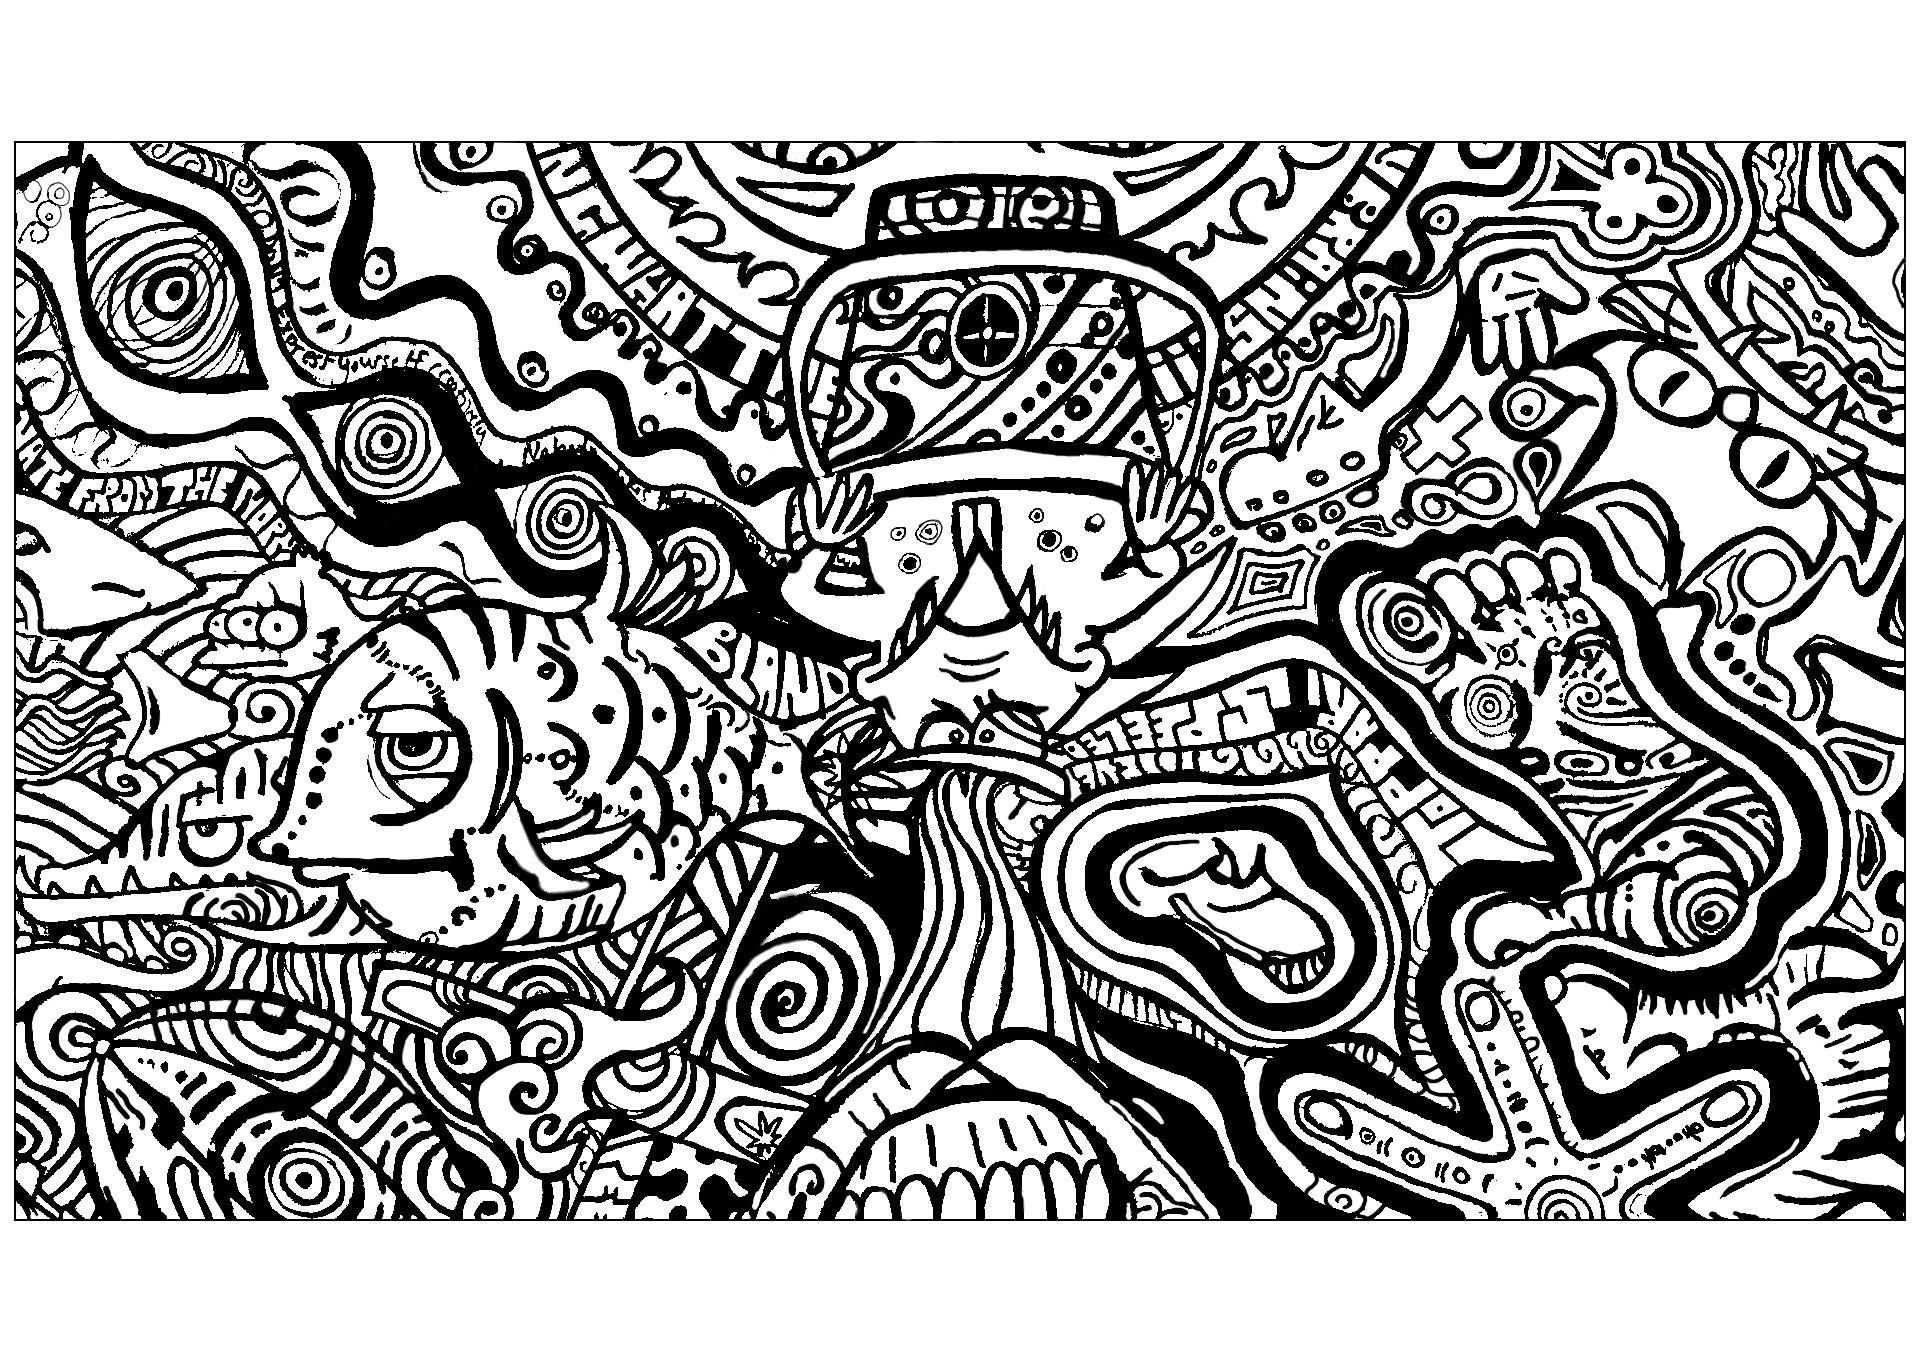 Psychedelic drawing with different subjects, including a feet and a fish !